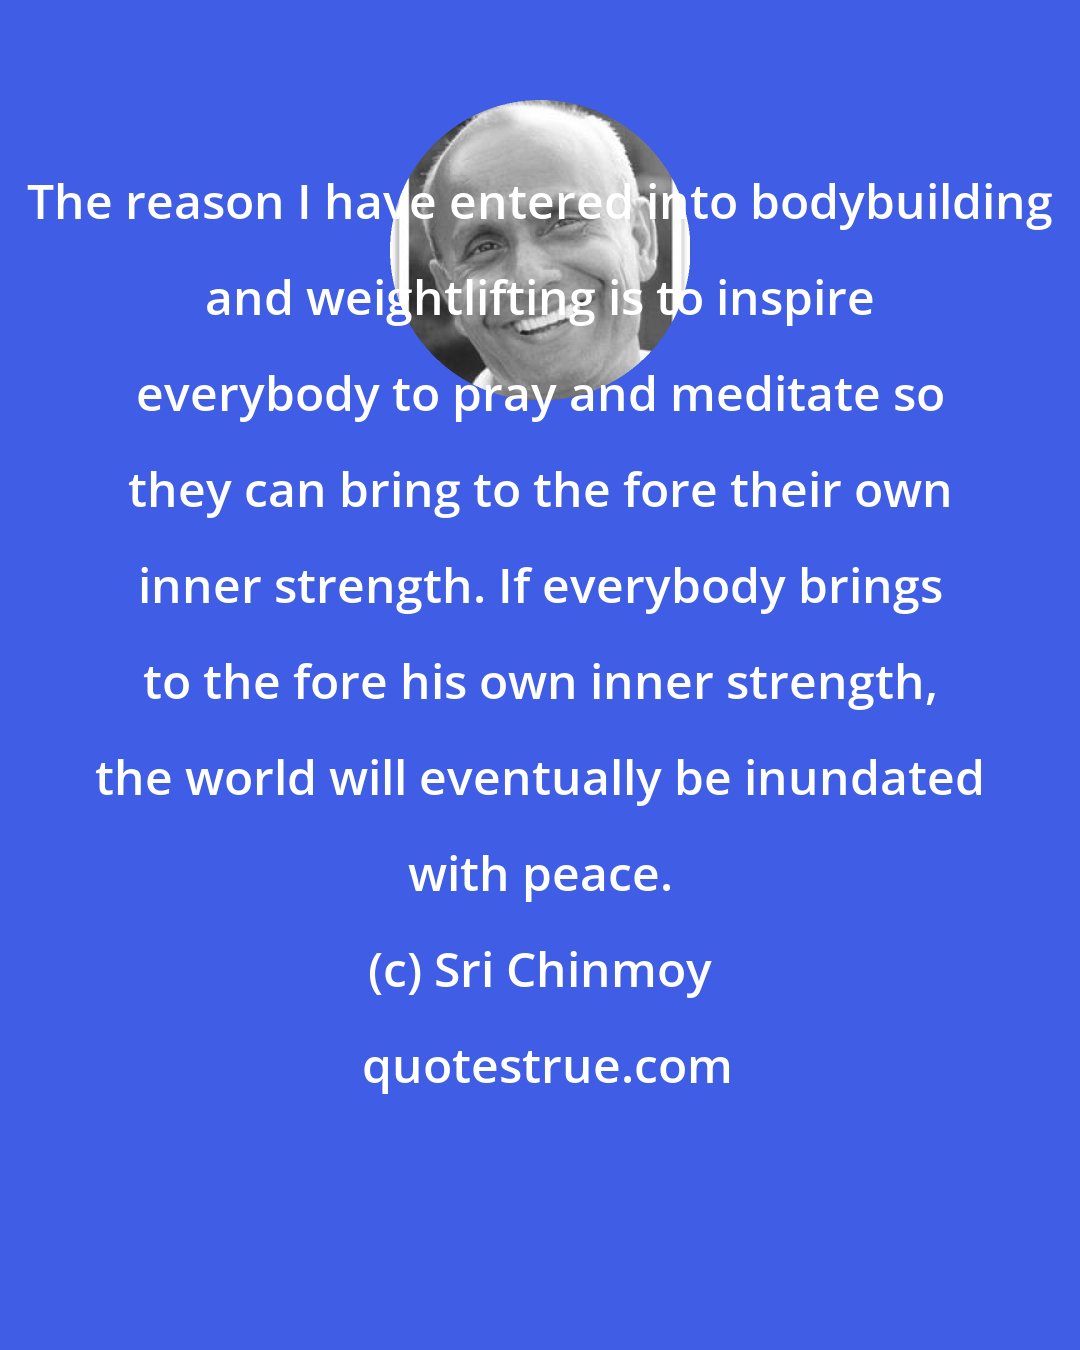 Sri Chinmoy: The reason I have entered into bodybuilding and weightlifting is to inspire everybody to pray and meditate so they can bring to the fore their own inner strength. If everybody brings to the fore his own inner strength, the world will eventually be inundated with peace.